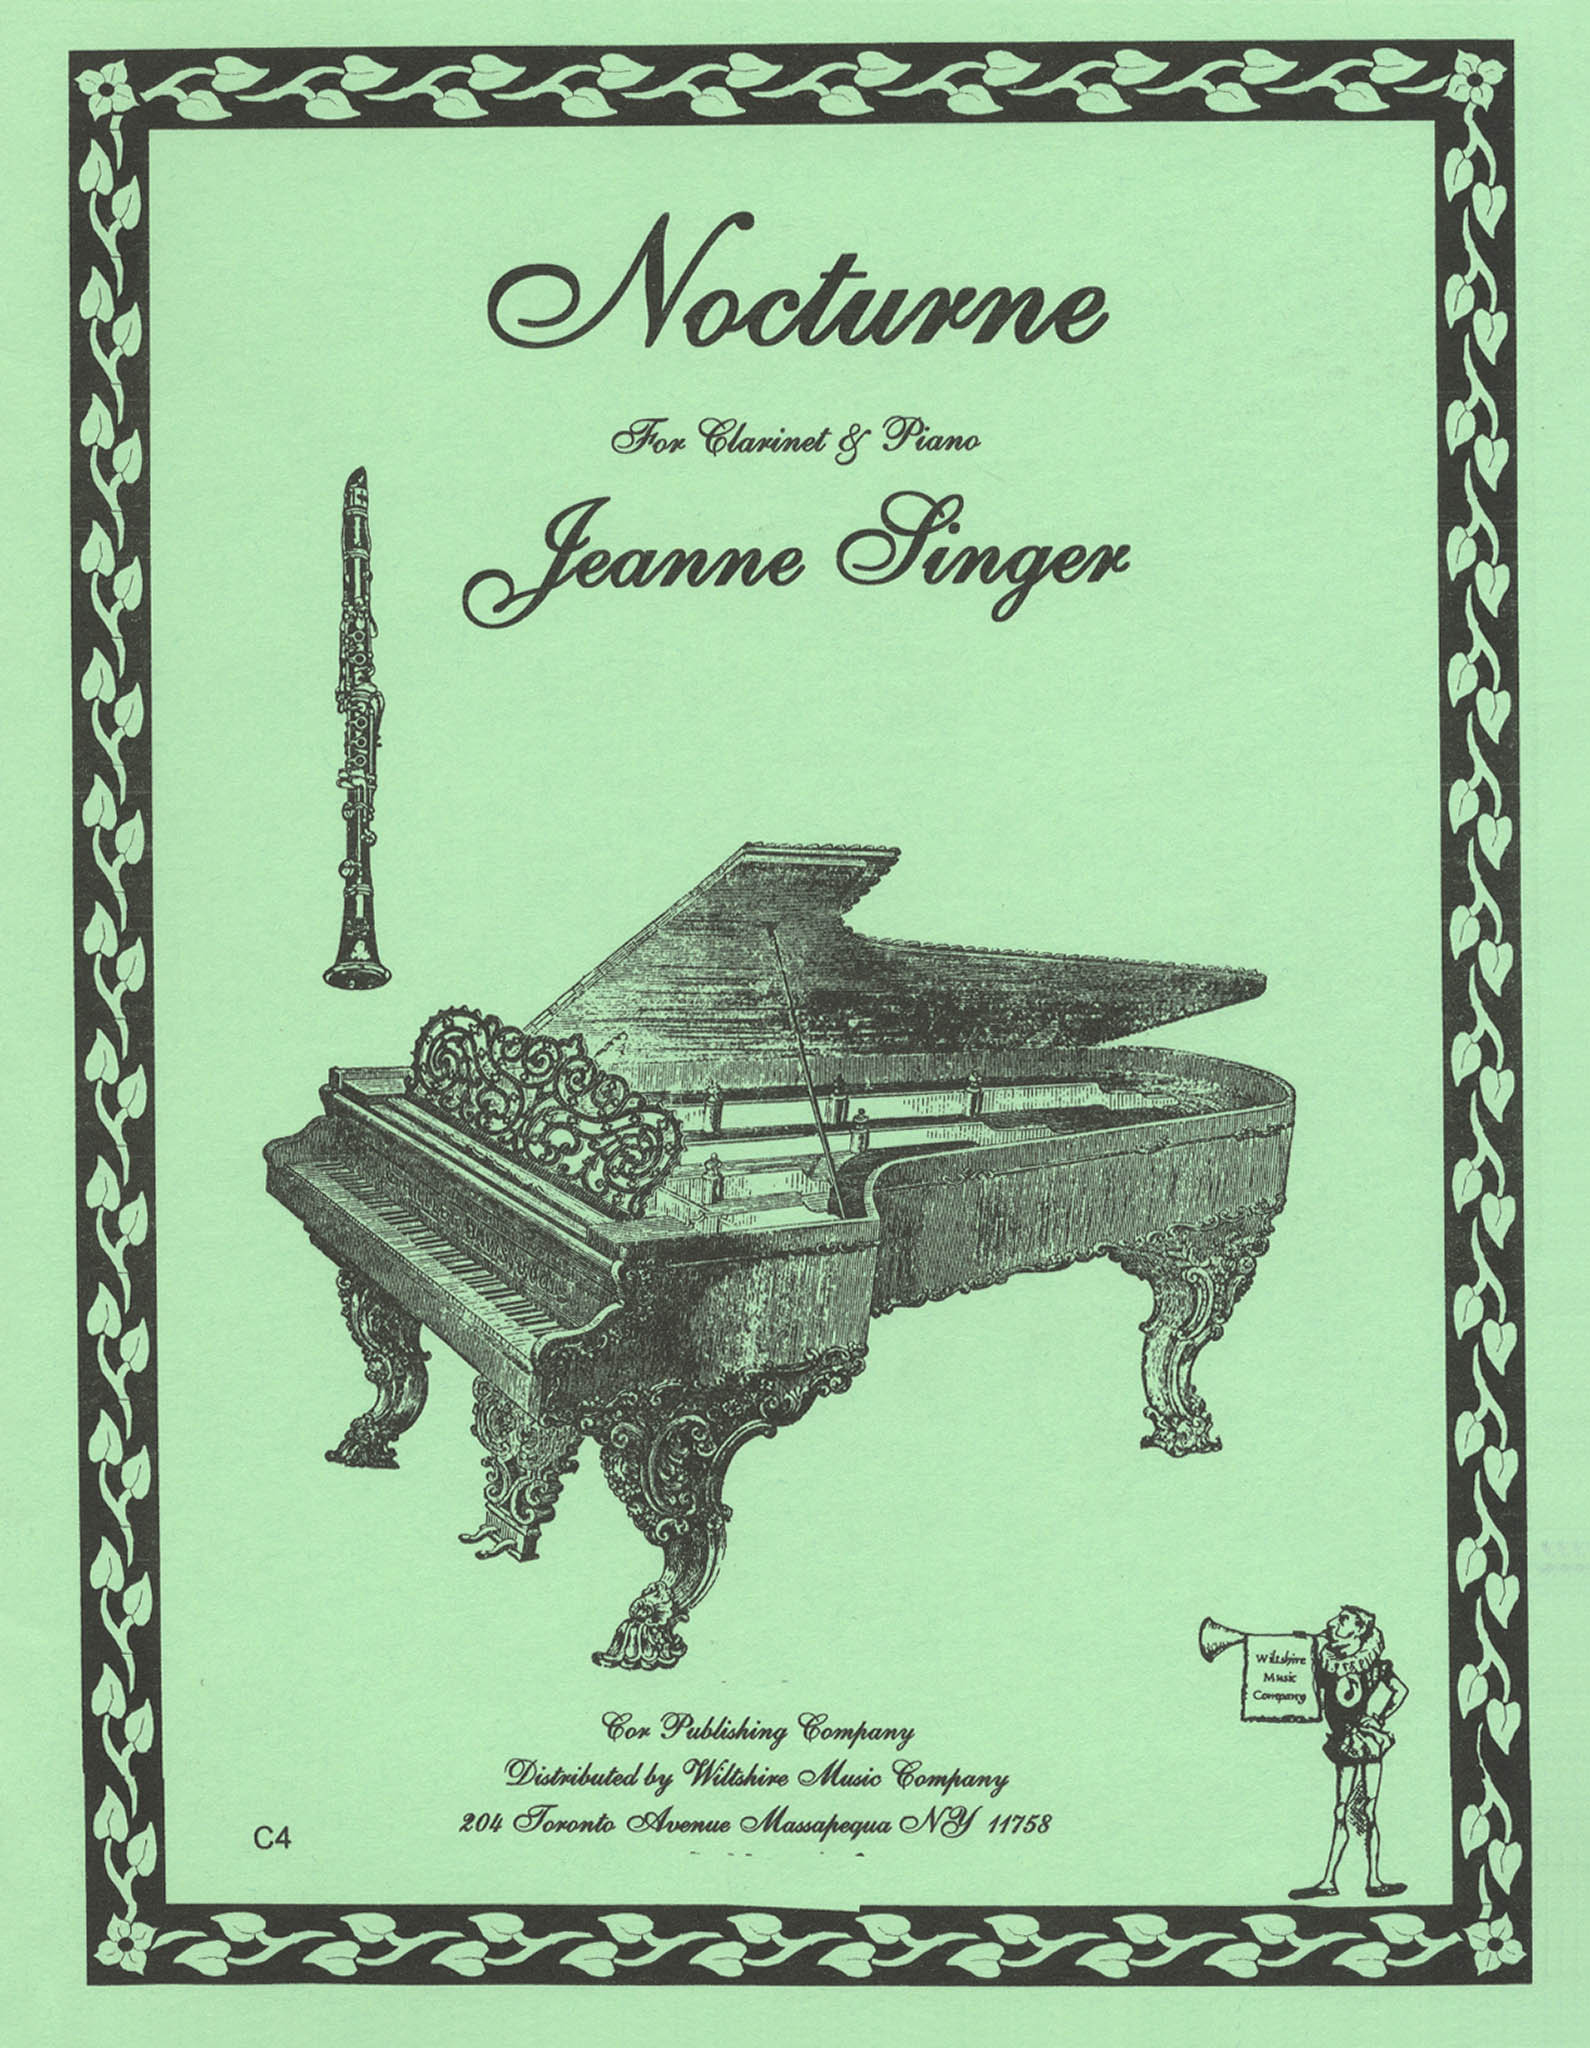 Jeanne Singer Nocturne clarinet and piano cover